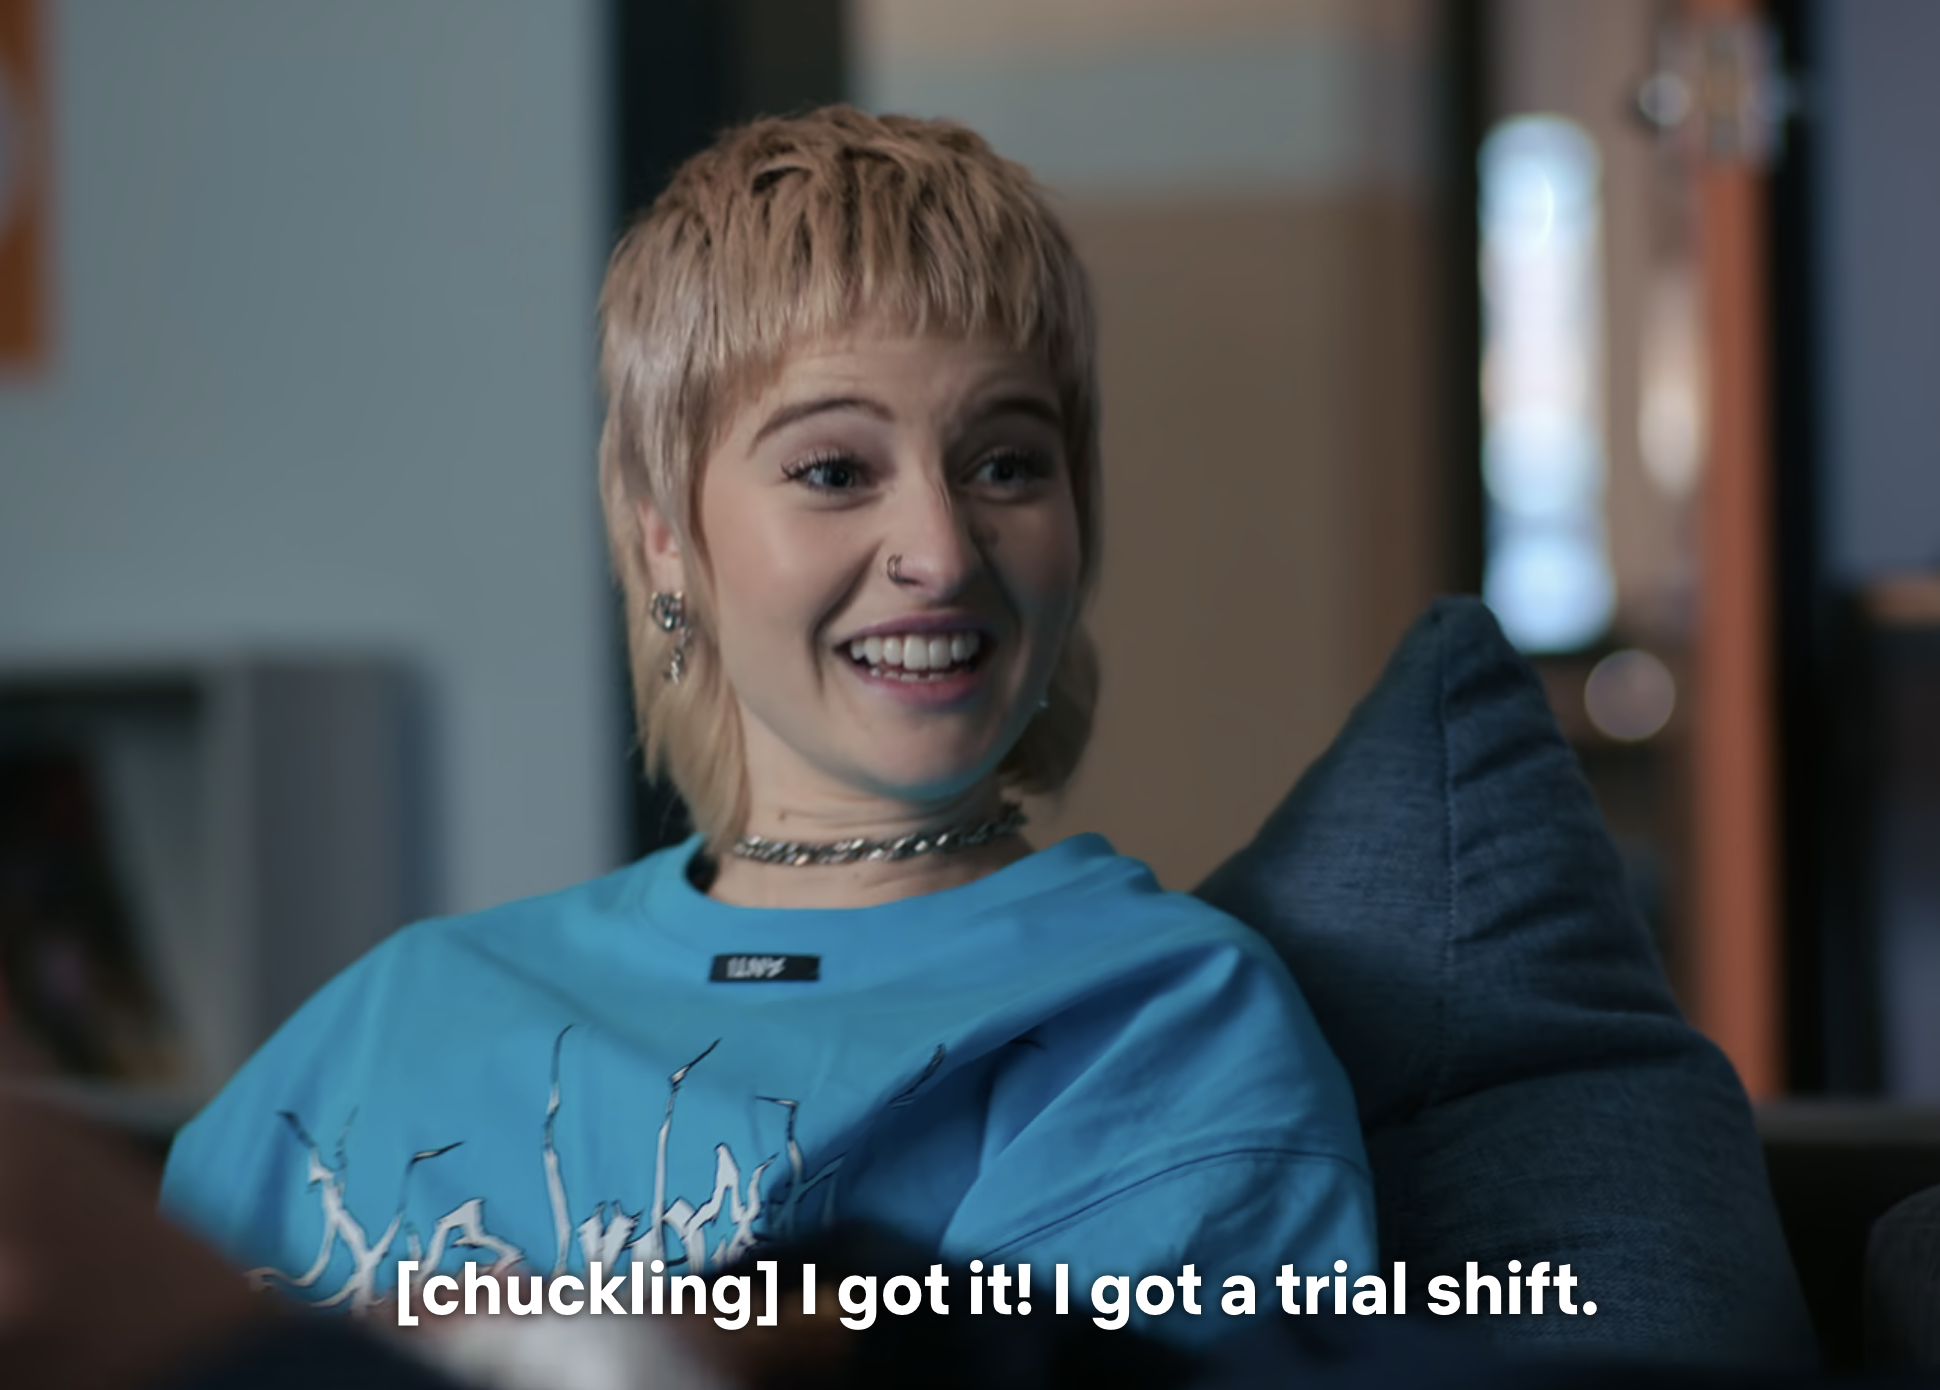 A woman smiling on a sofa with subtitles, expressing joy about getting a trial shift